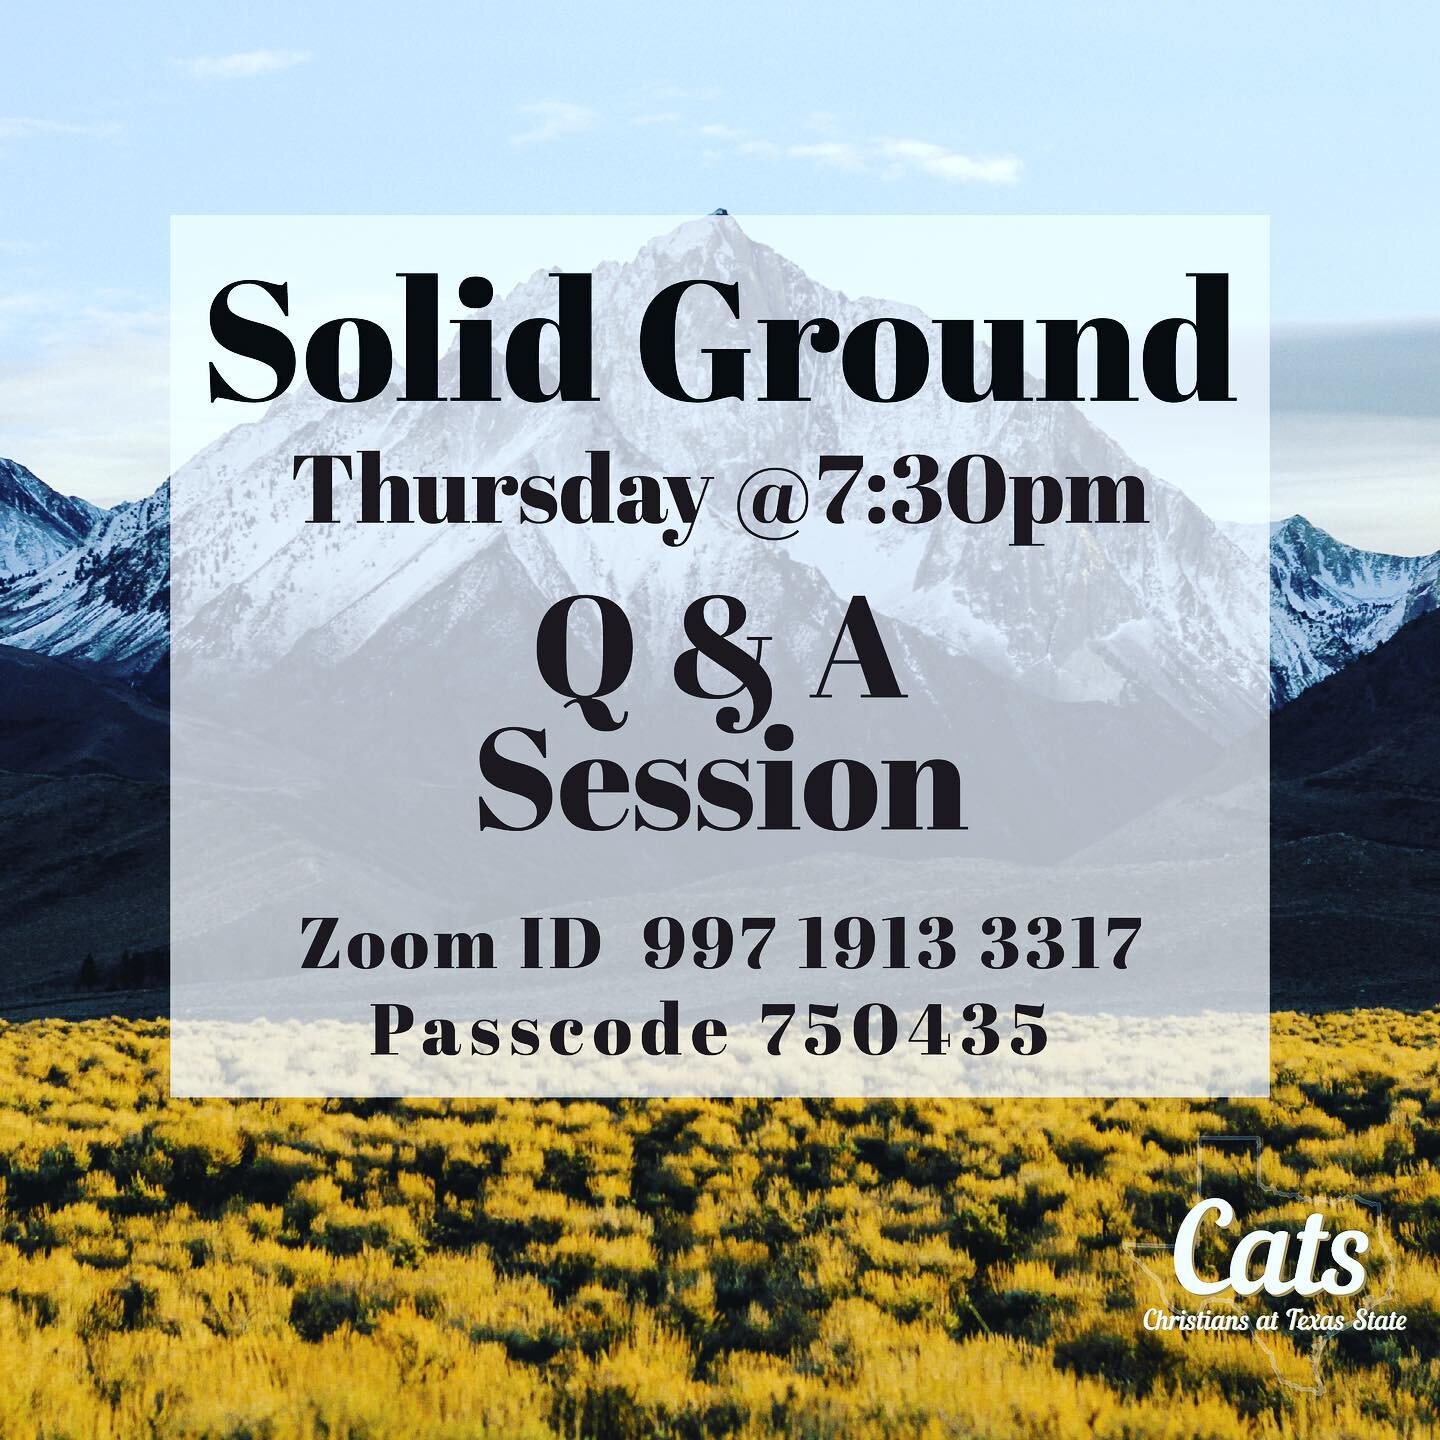 Come one, come all with your questions about Solid Ground! #questionsanswers #solidground #txst #theexcellent